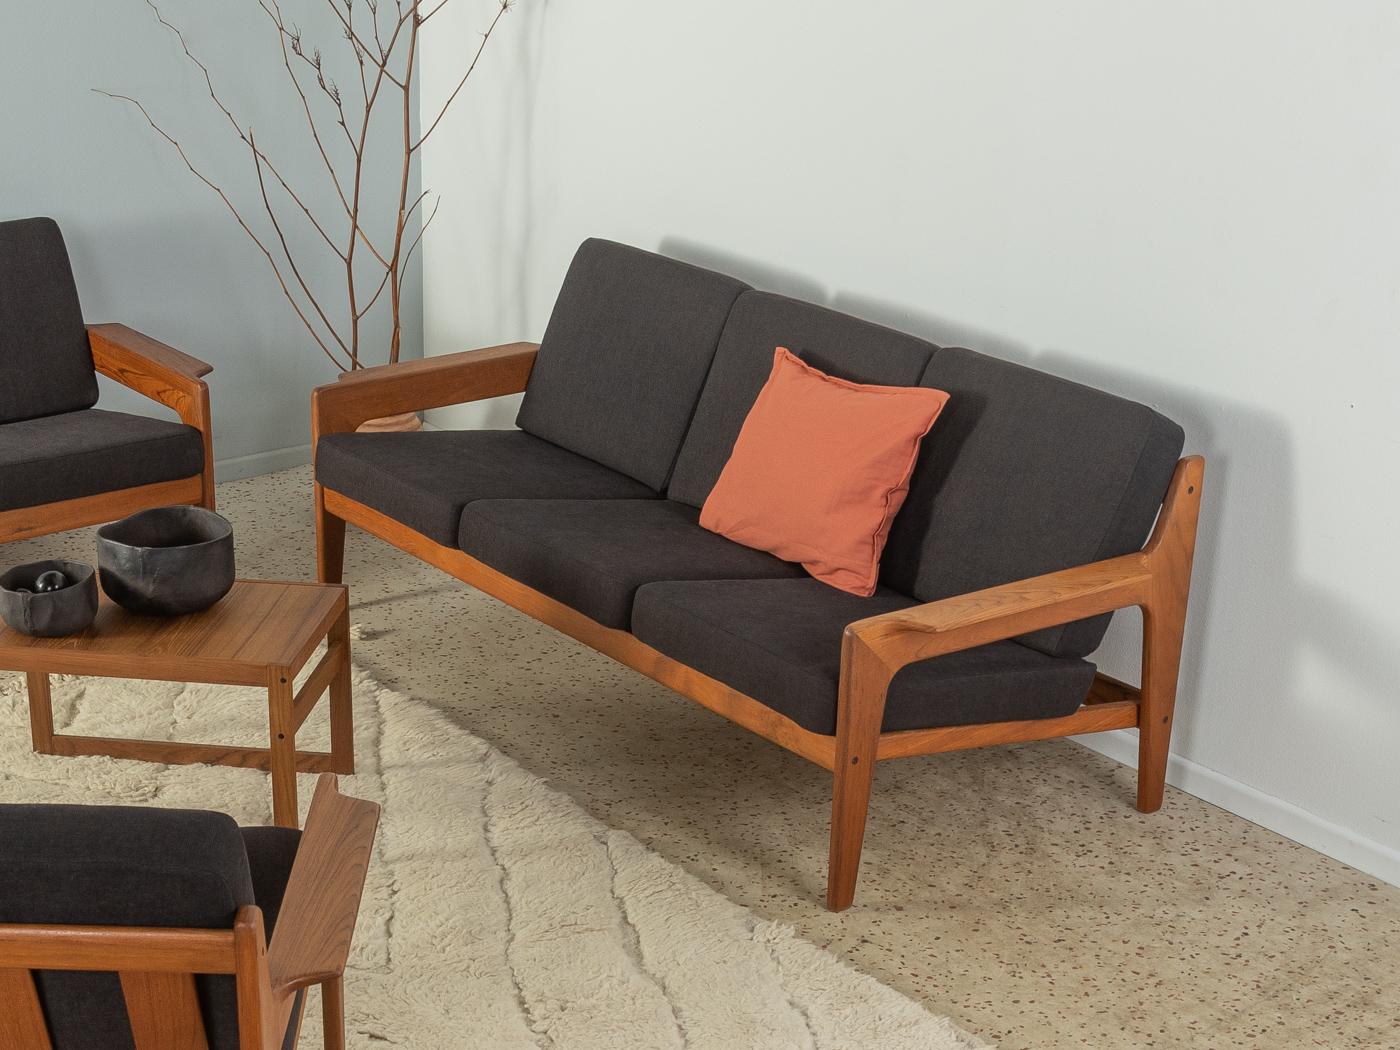 Classic 3-seater-sofa in teak from the 1960s by Arne Wahl Iversen for Komfort. The sofa has been reupholstered and covered with a high-quality fabric in black.

Quality Features:
 accomplished design: perfect proportions and visible attention to